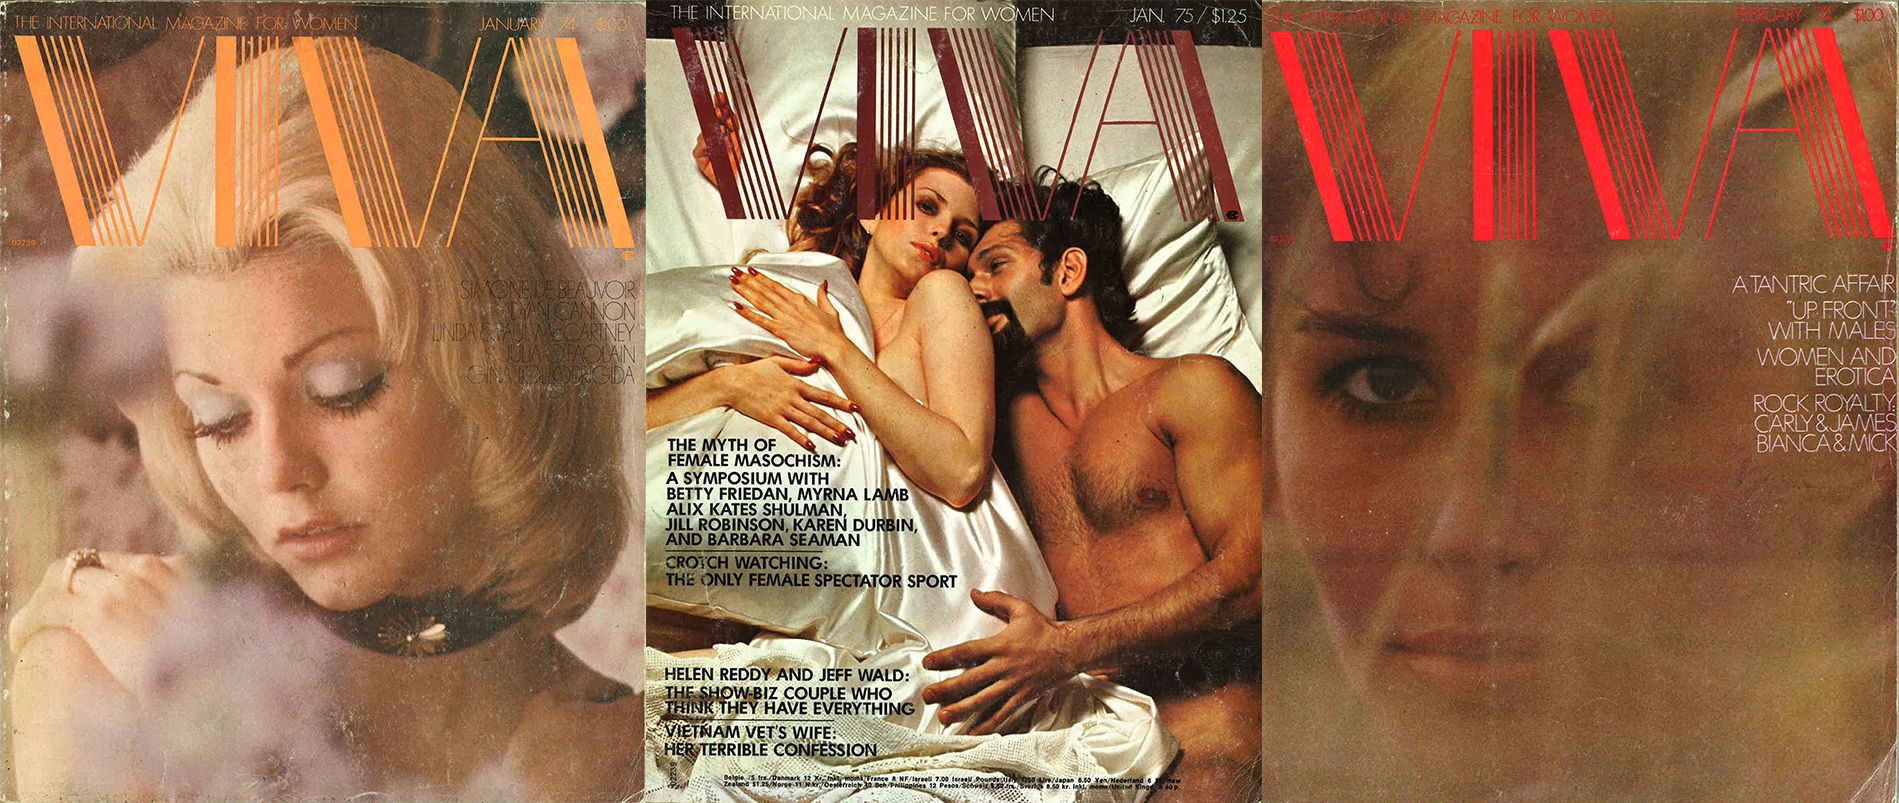 70s Porn Magazines Mother Daughter - An Oral History of Viva, the '70s Porn Magazine for Women